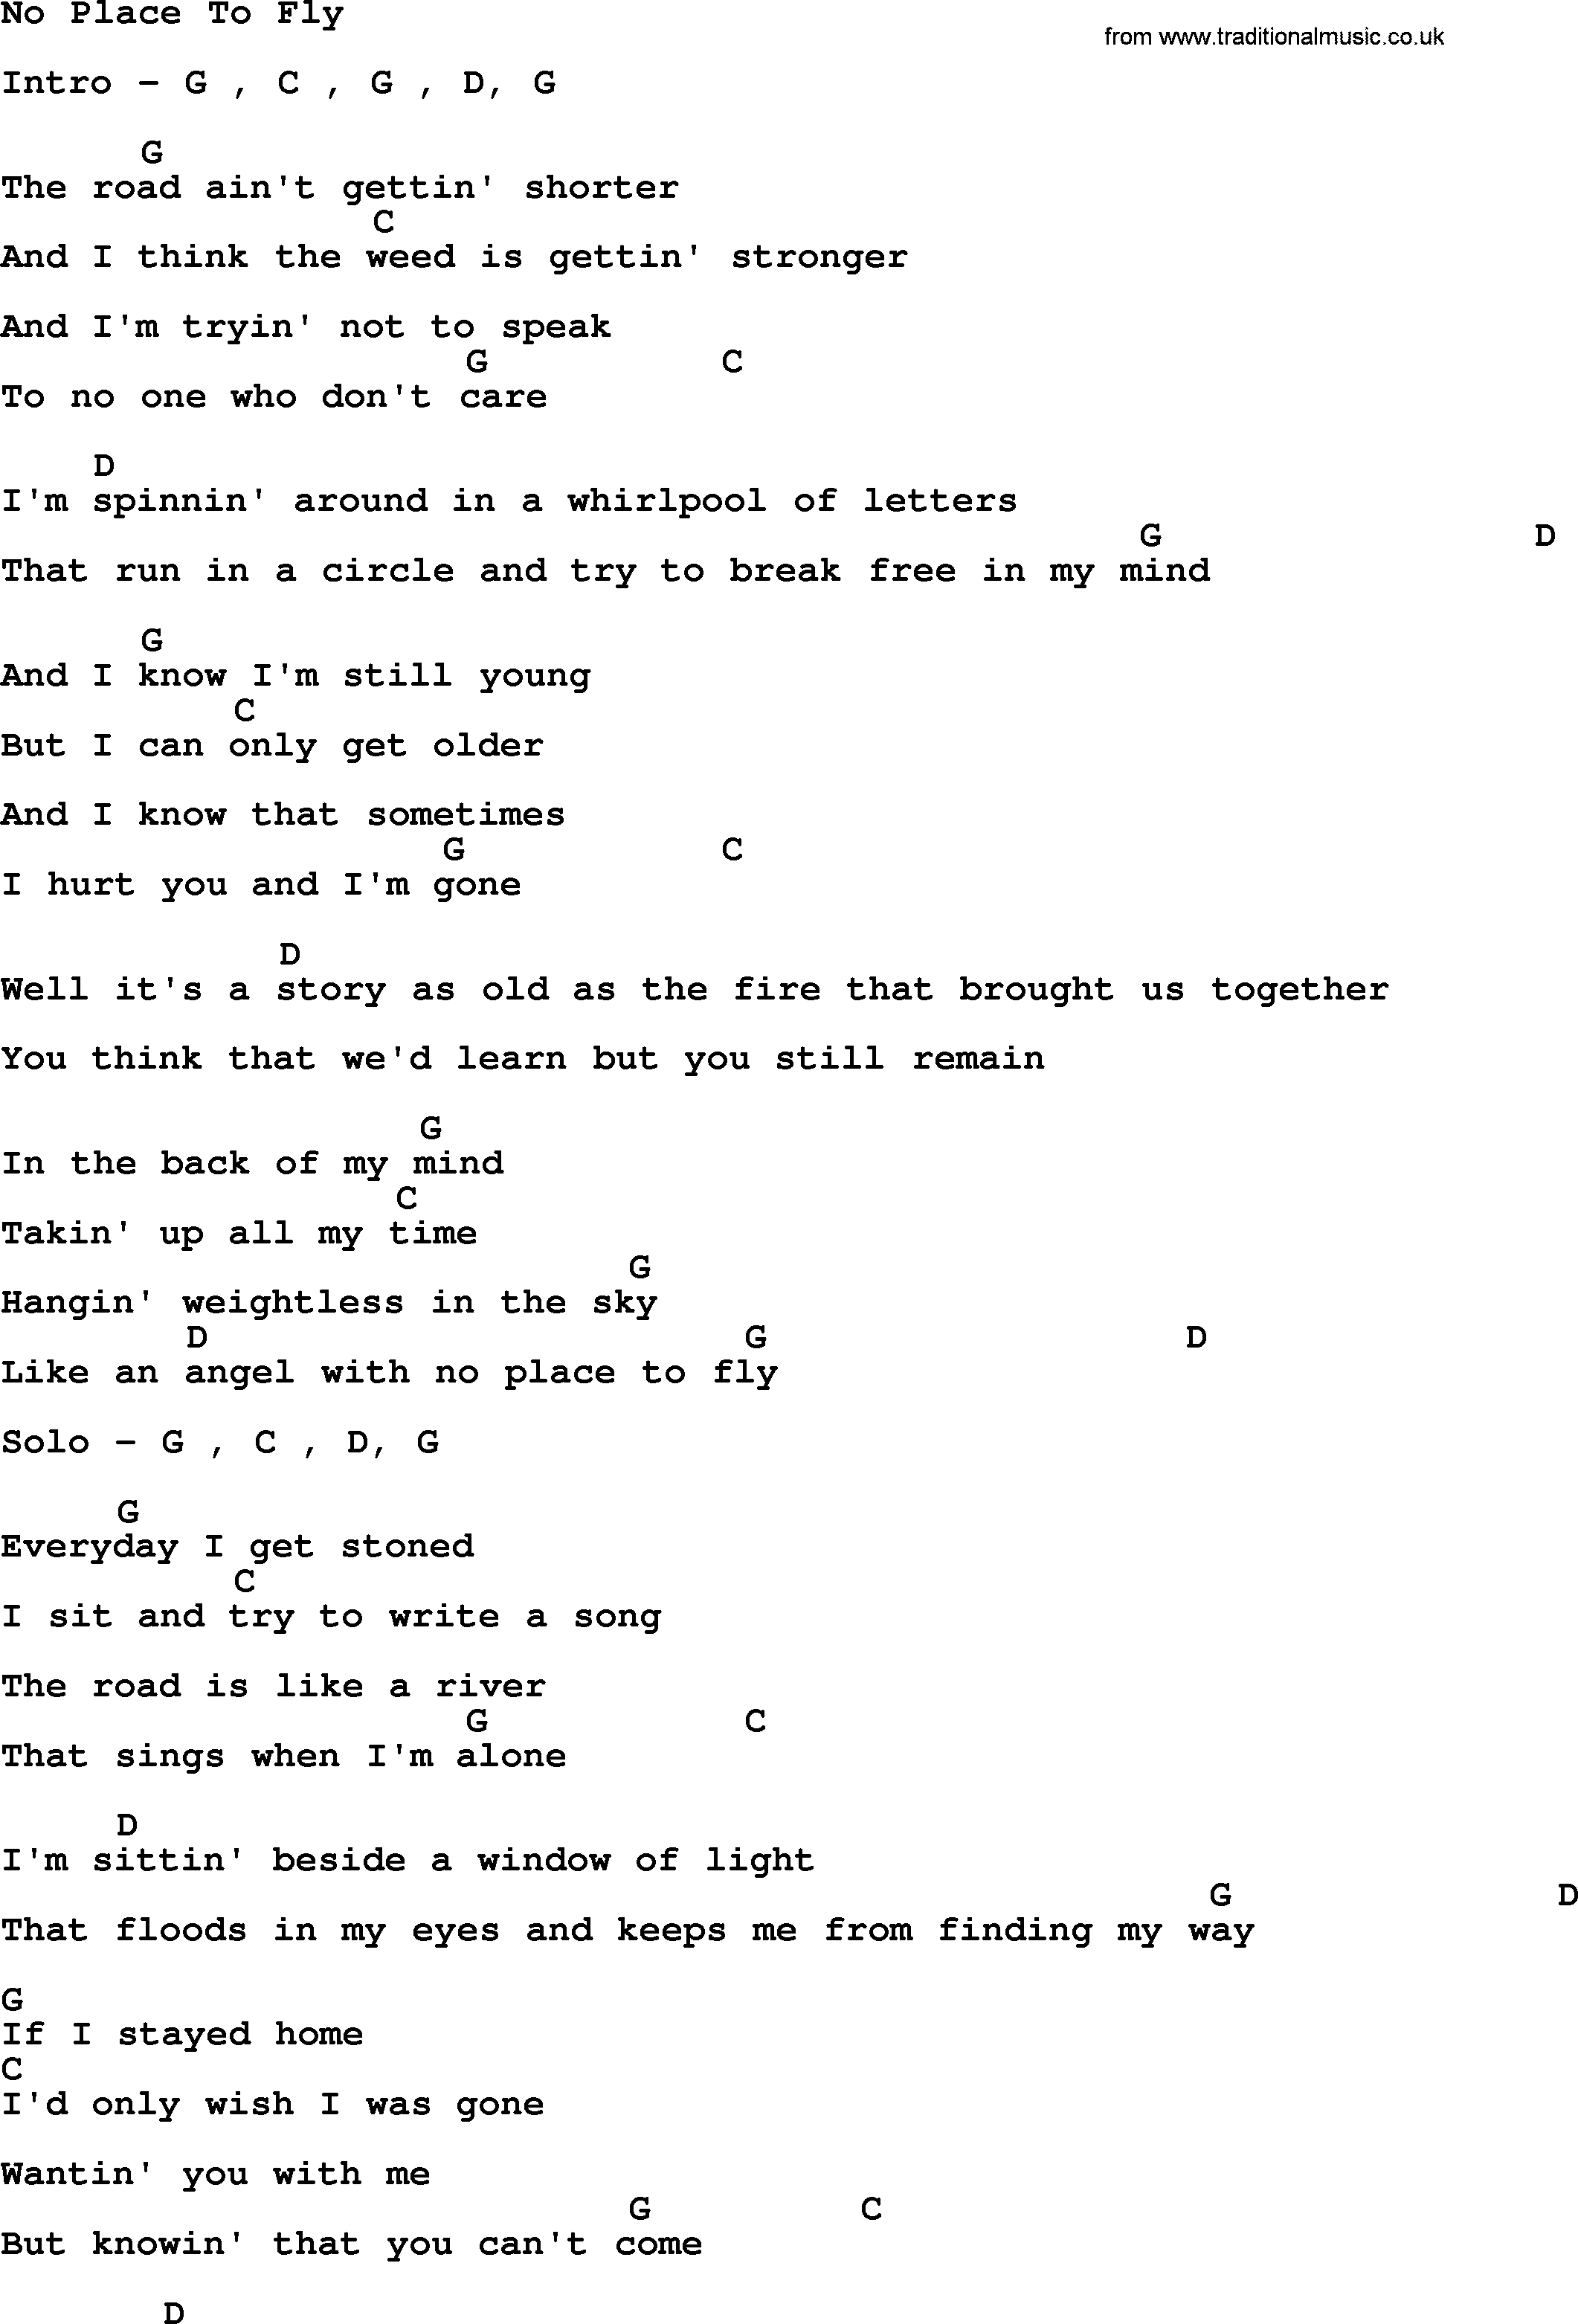 Willie Nelson song: No Place To Fly, lyrics and chords